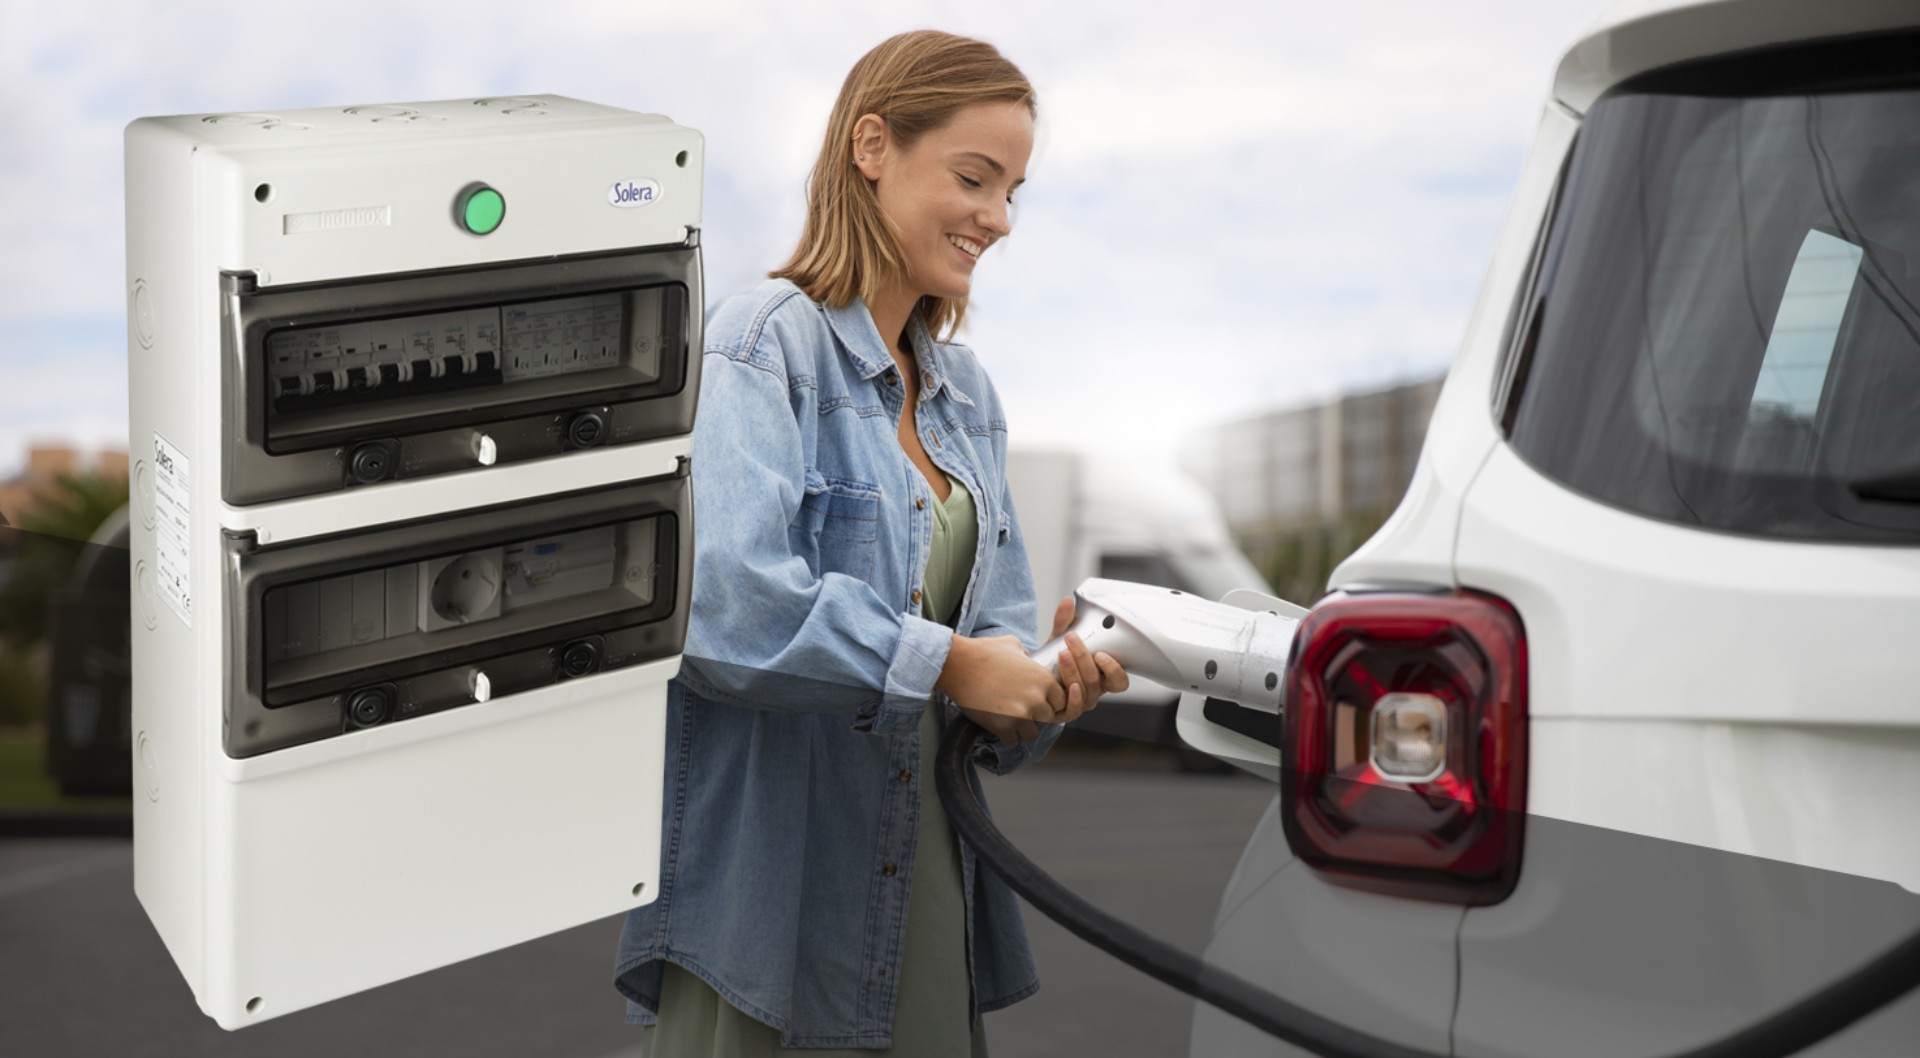 Protective boards for electric vehicle charging stations